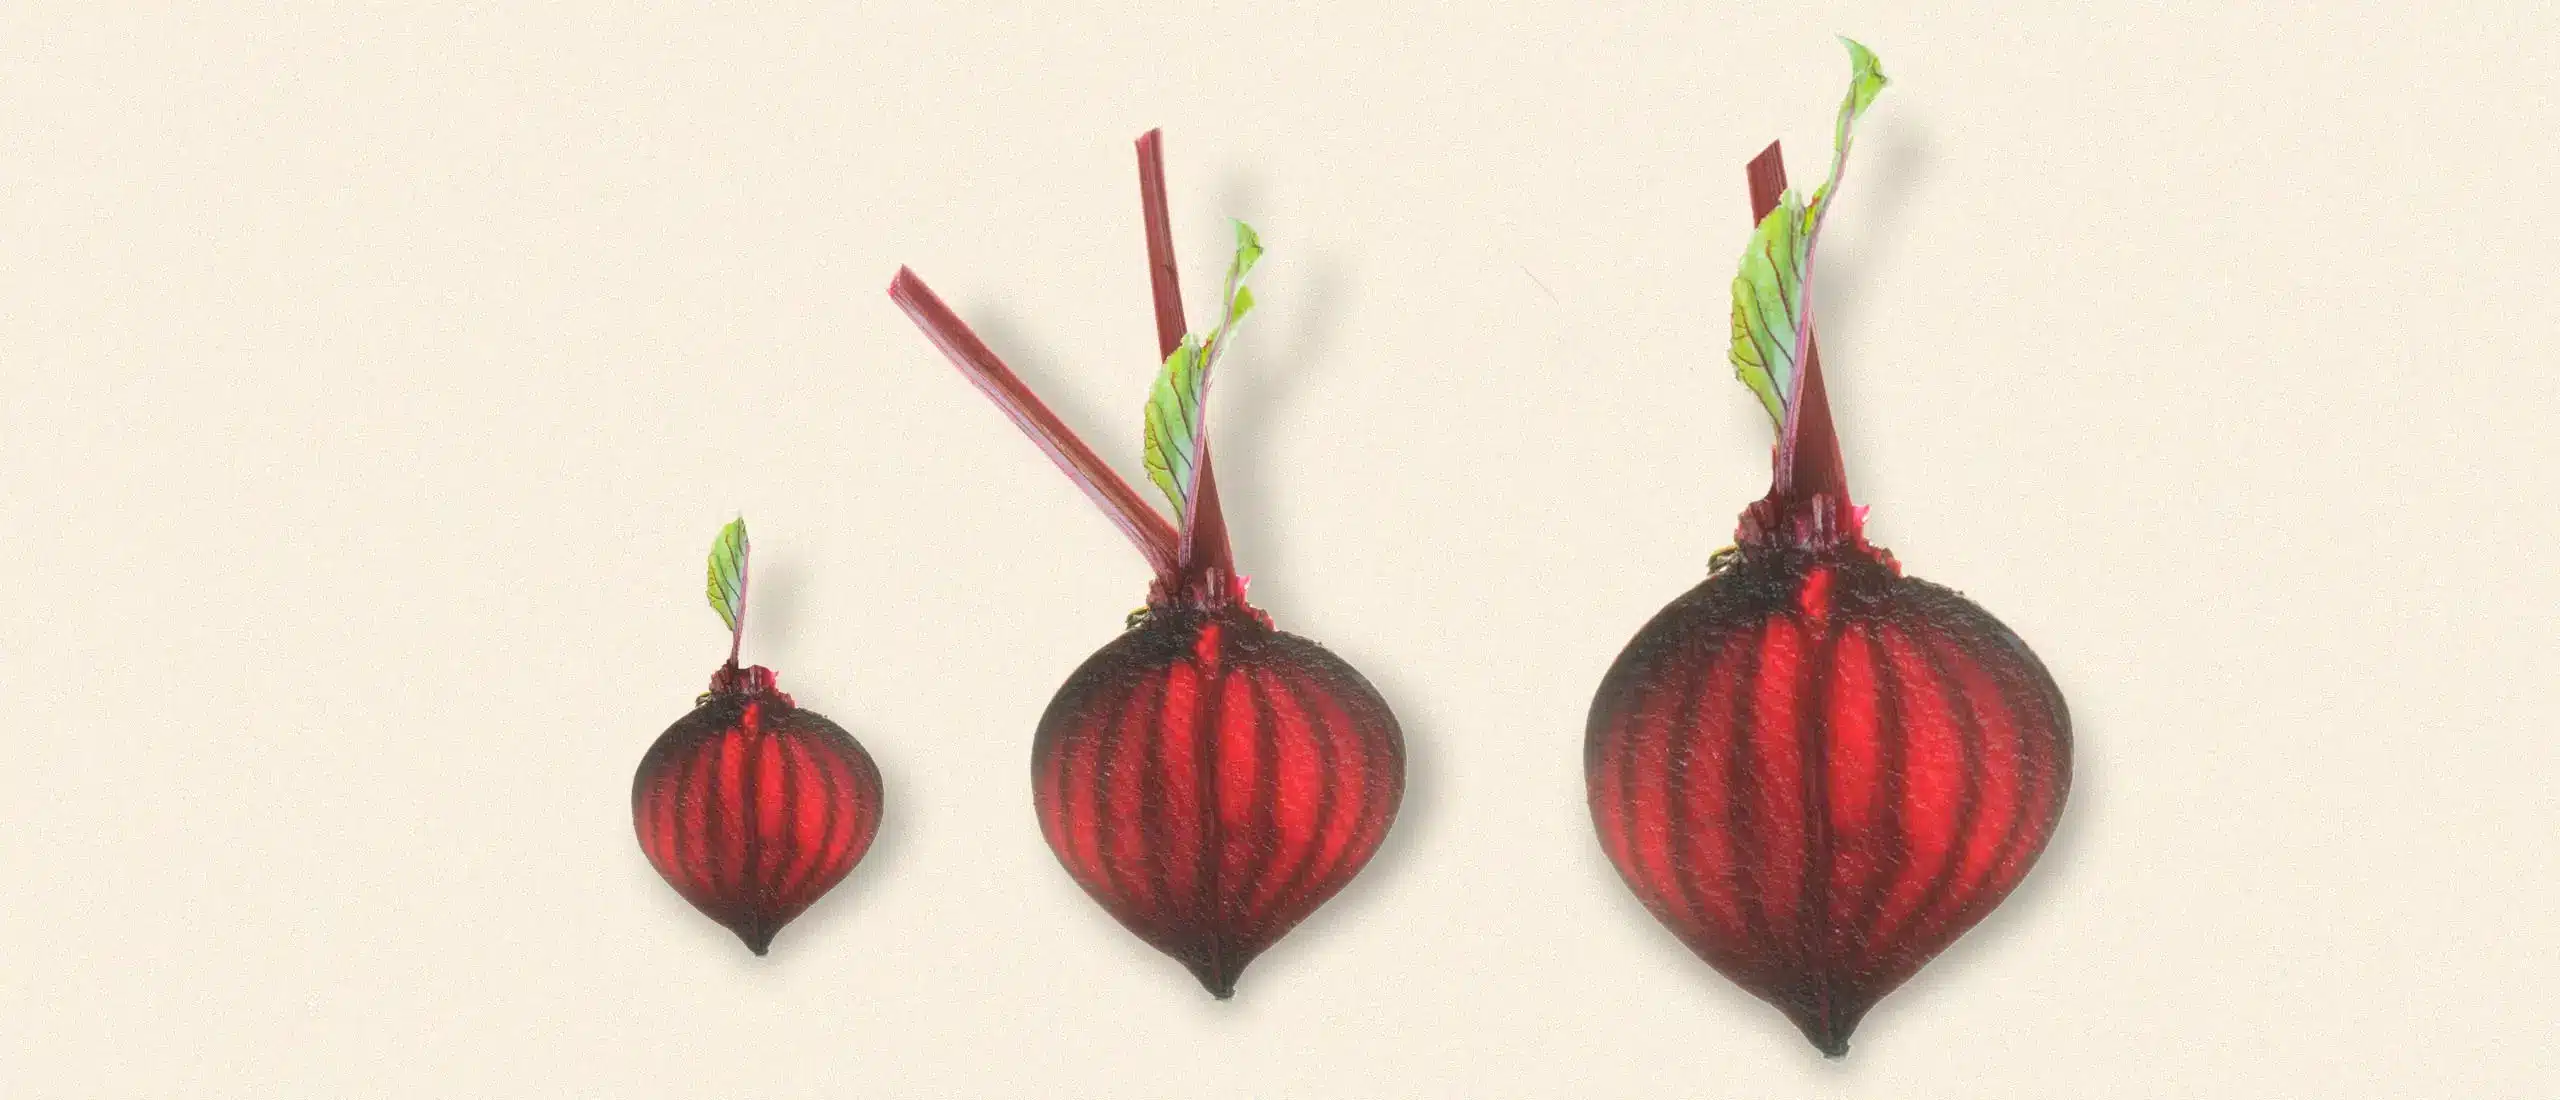 Three beets in a row